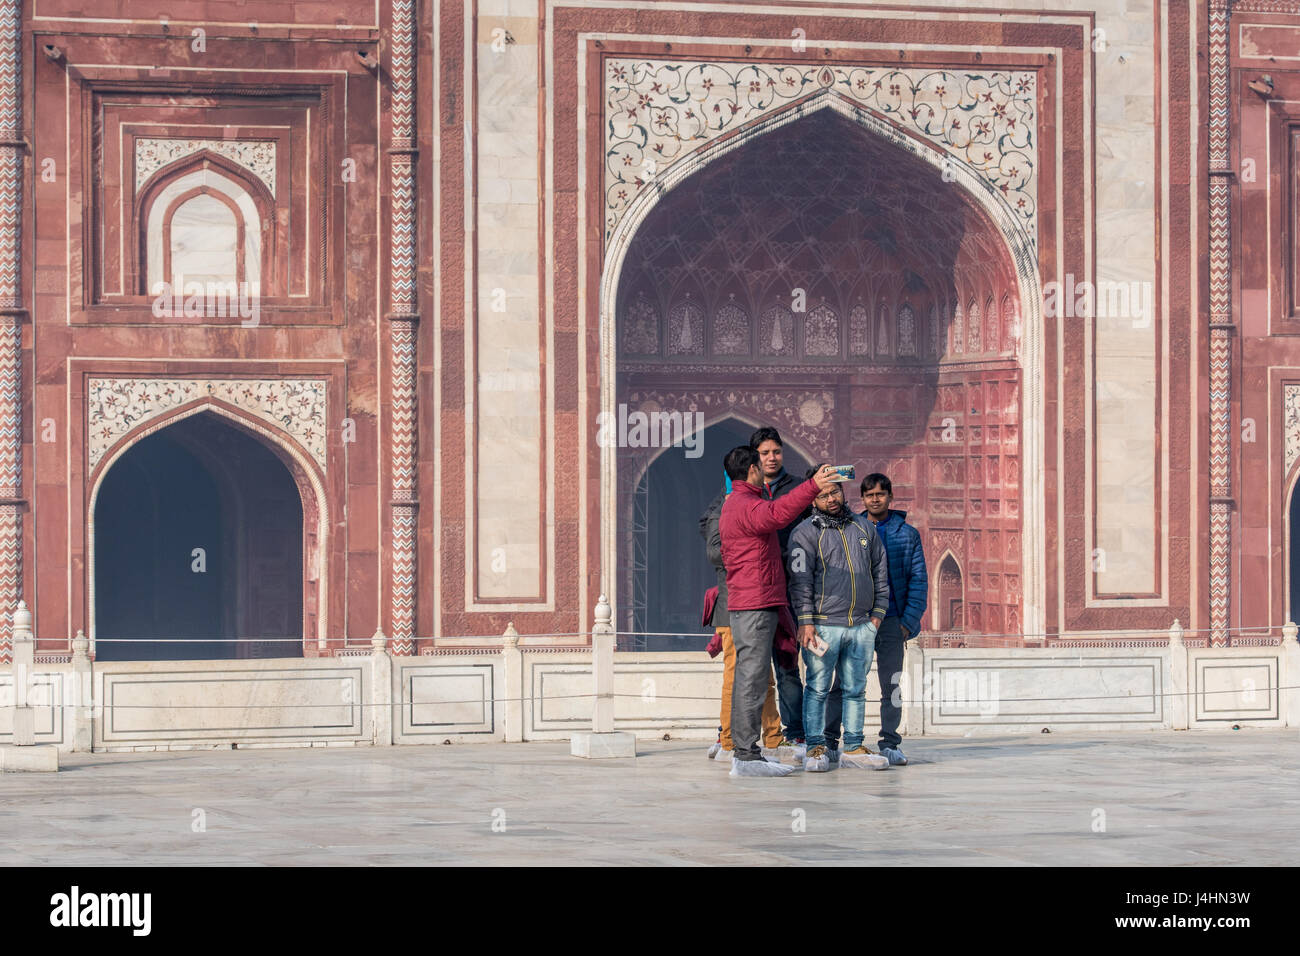 Tourists taking photos just outside of the main tomb entrance of the Taj Mahal, located in Agra, India. Stock Photo